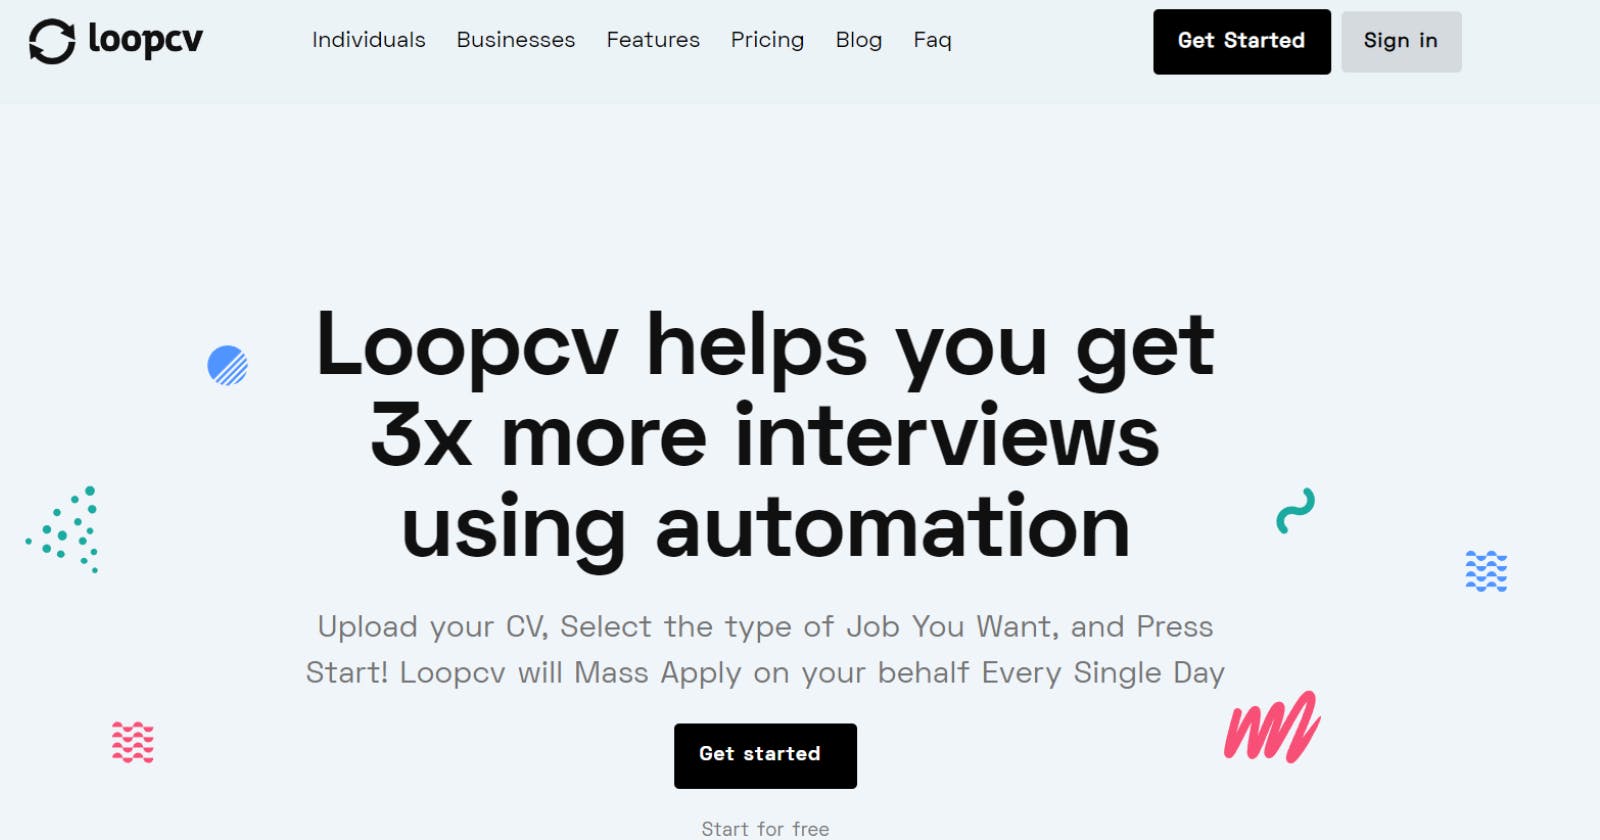 LoopCV - Your Automated Job Search Partner